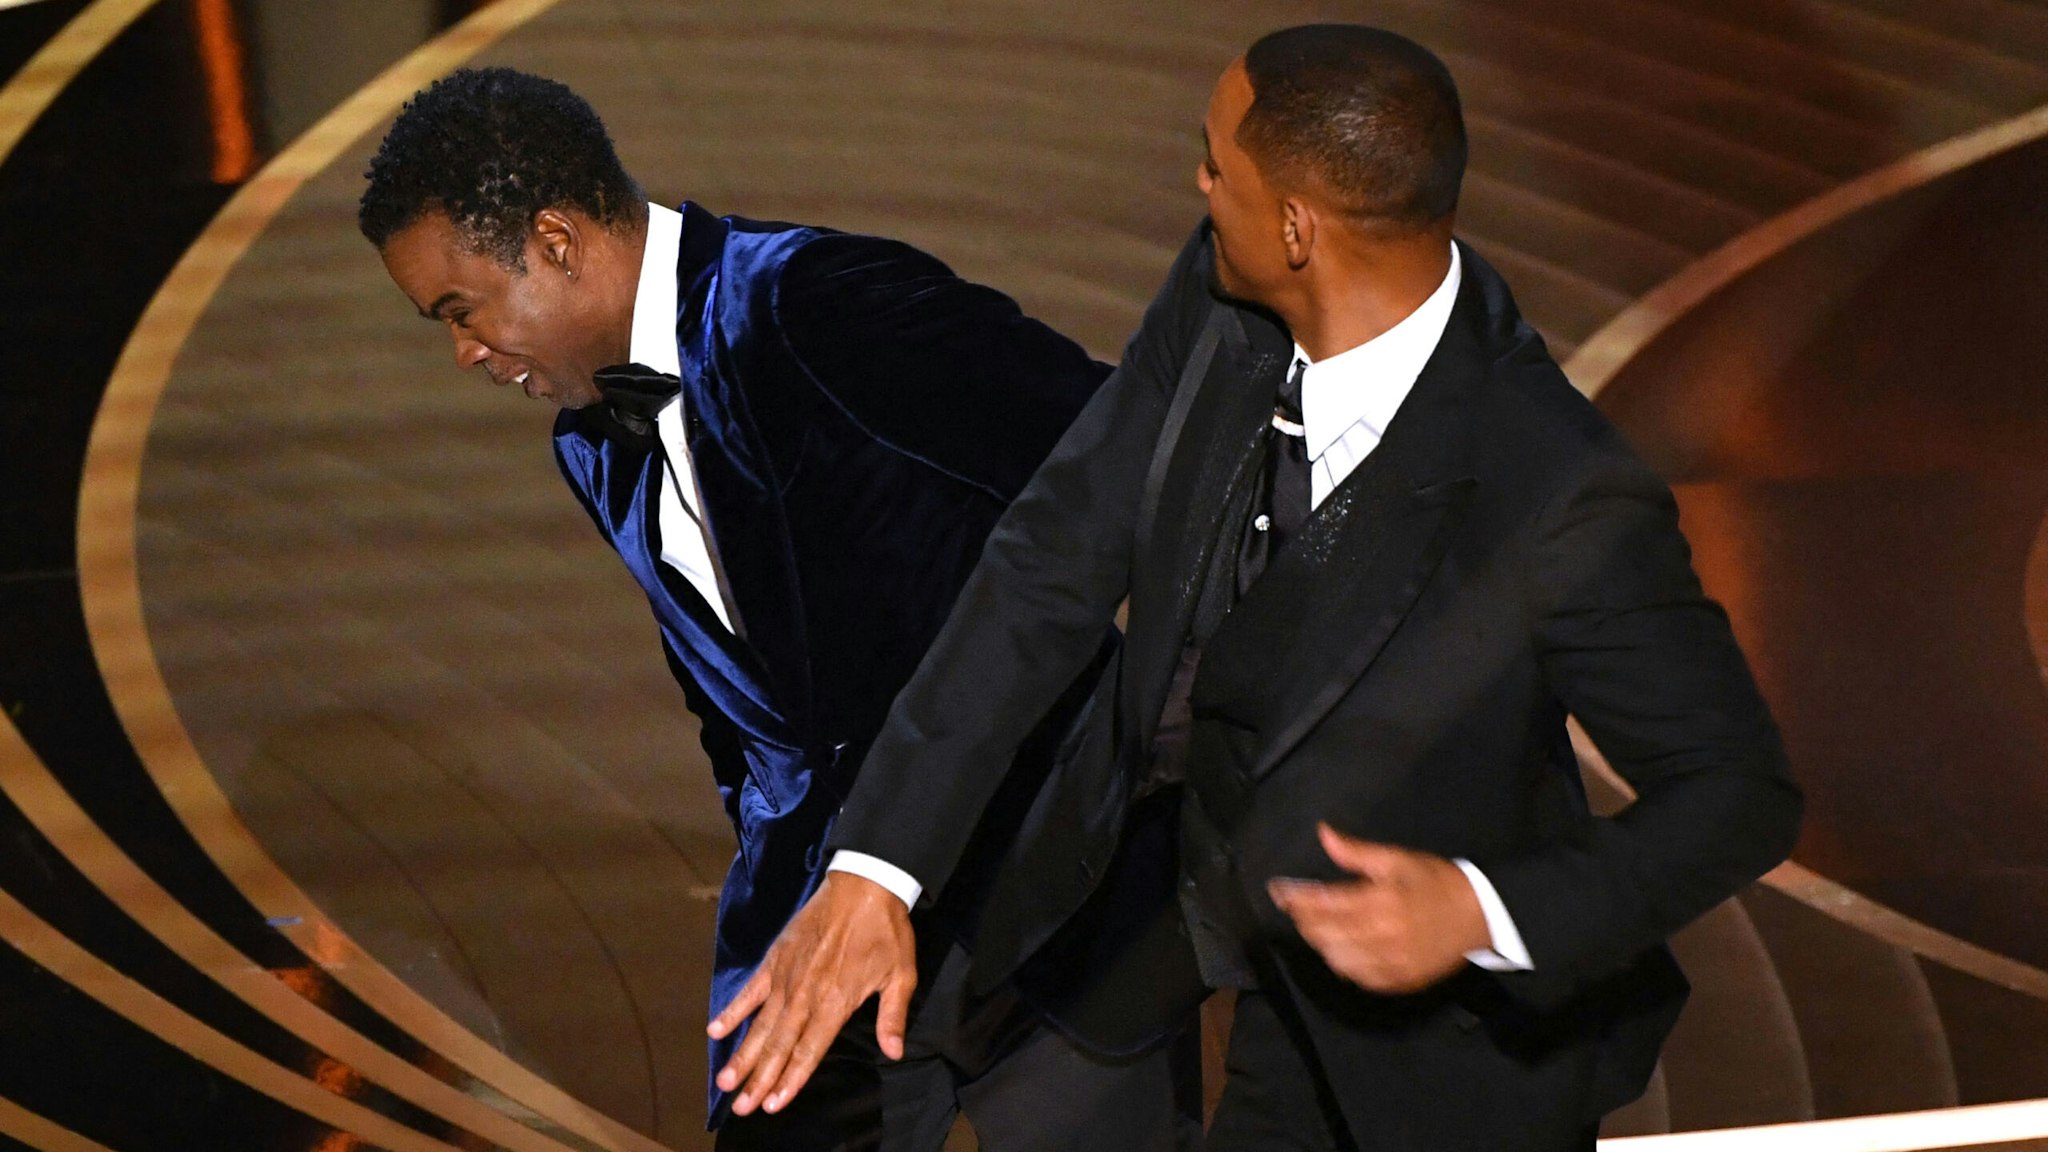 US actor Will Smith (R) slaps US actor Chris Rock onstage during the 94th Oscars at the Dolby Theatre in Hollywood, California on March 27, 2022.